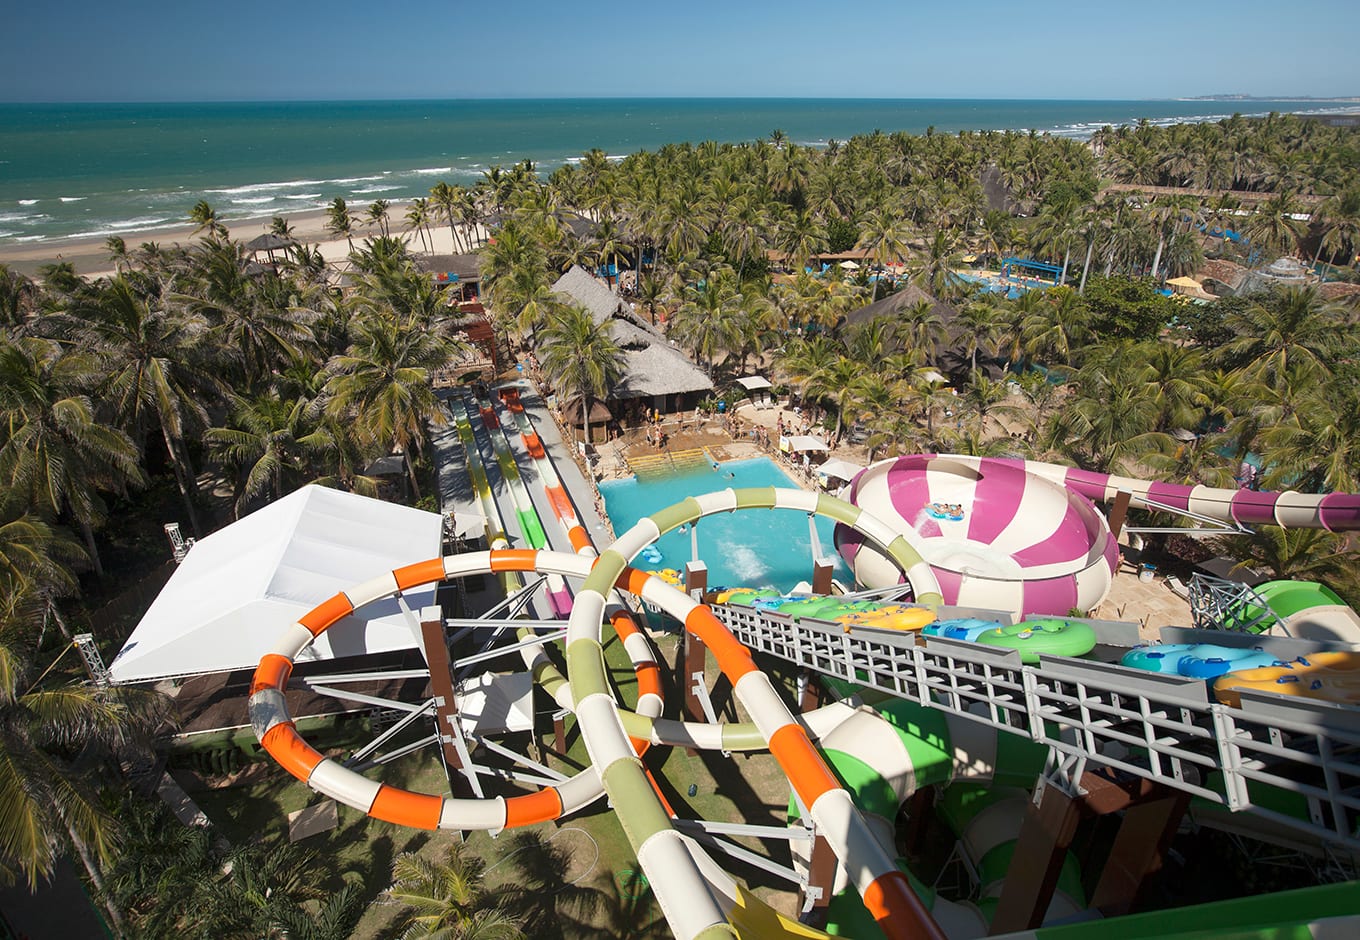 Aerial view of the waterslides at the Beach Park Fortaleza, Brazil.